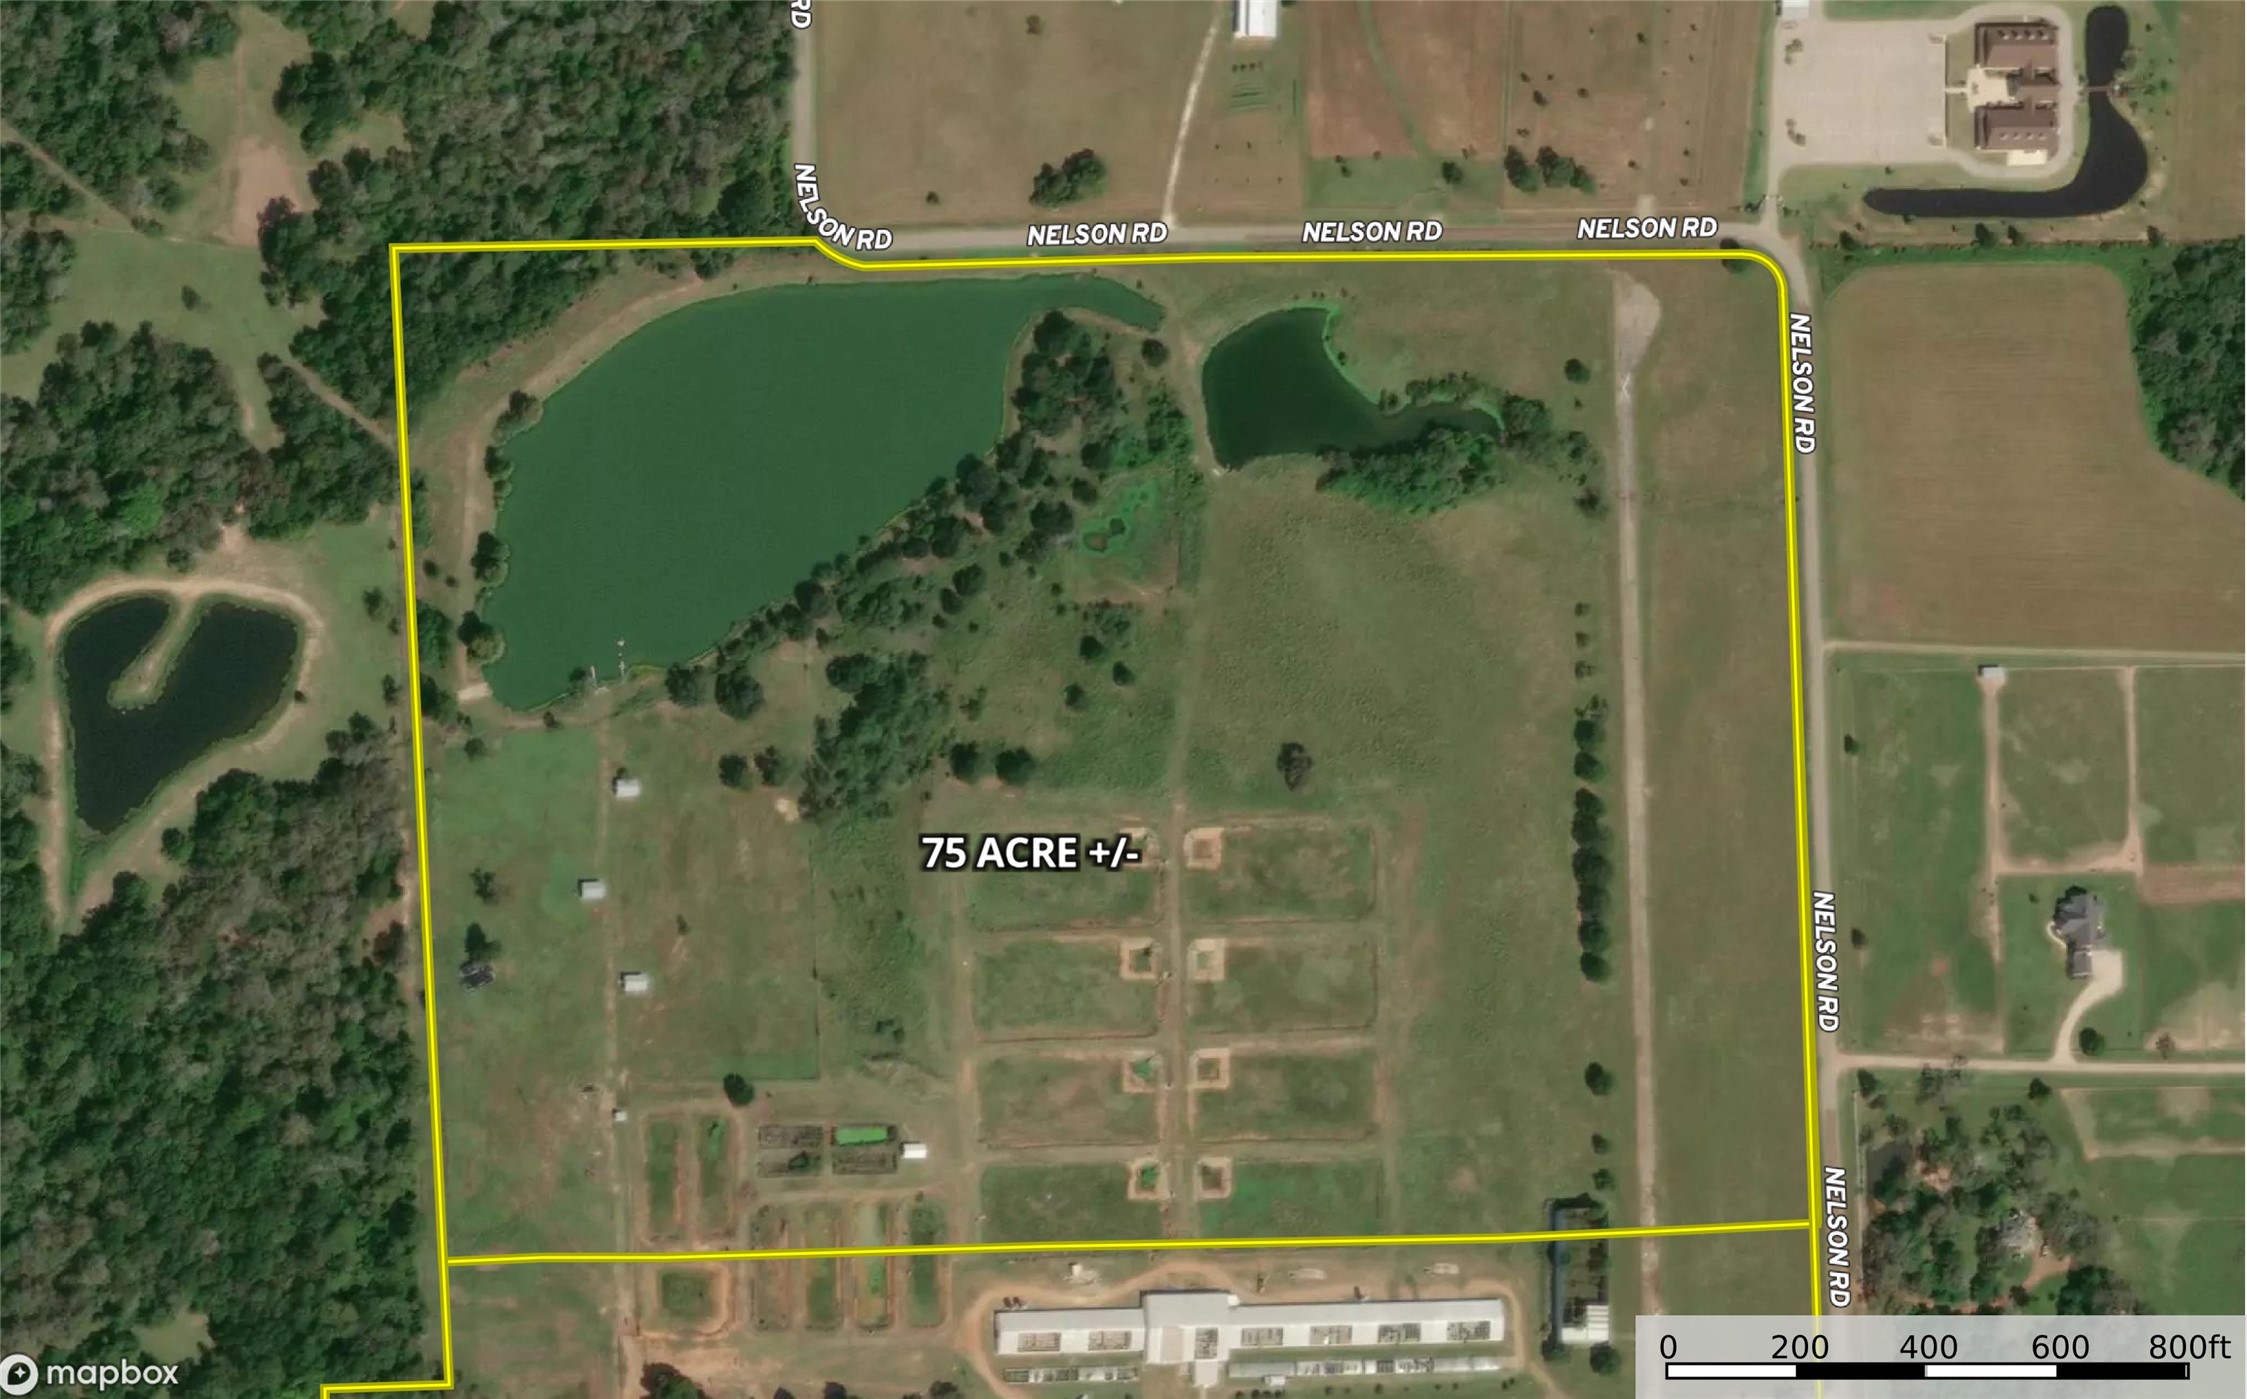 75 Acre +/- tract for sale. Can be divided into smaller tracts